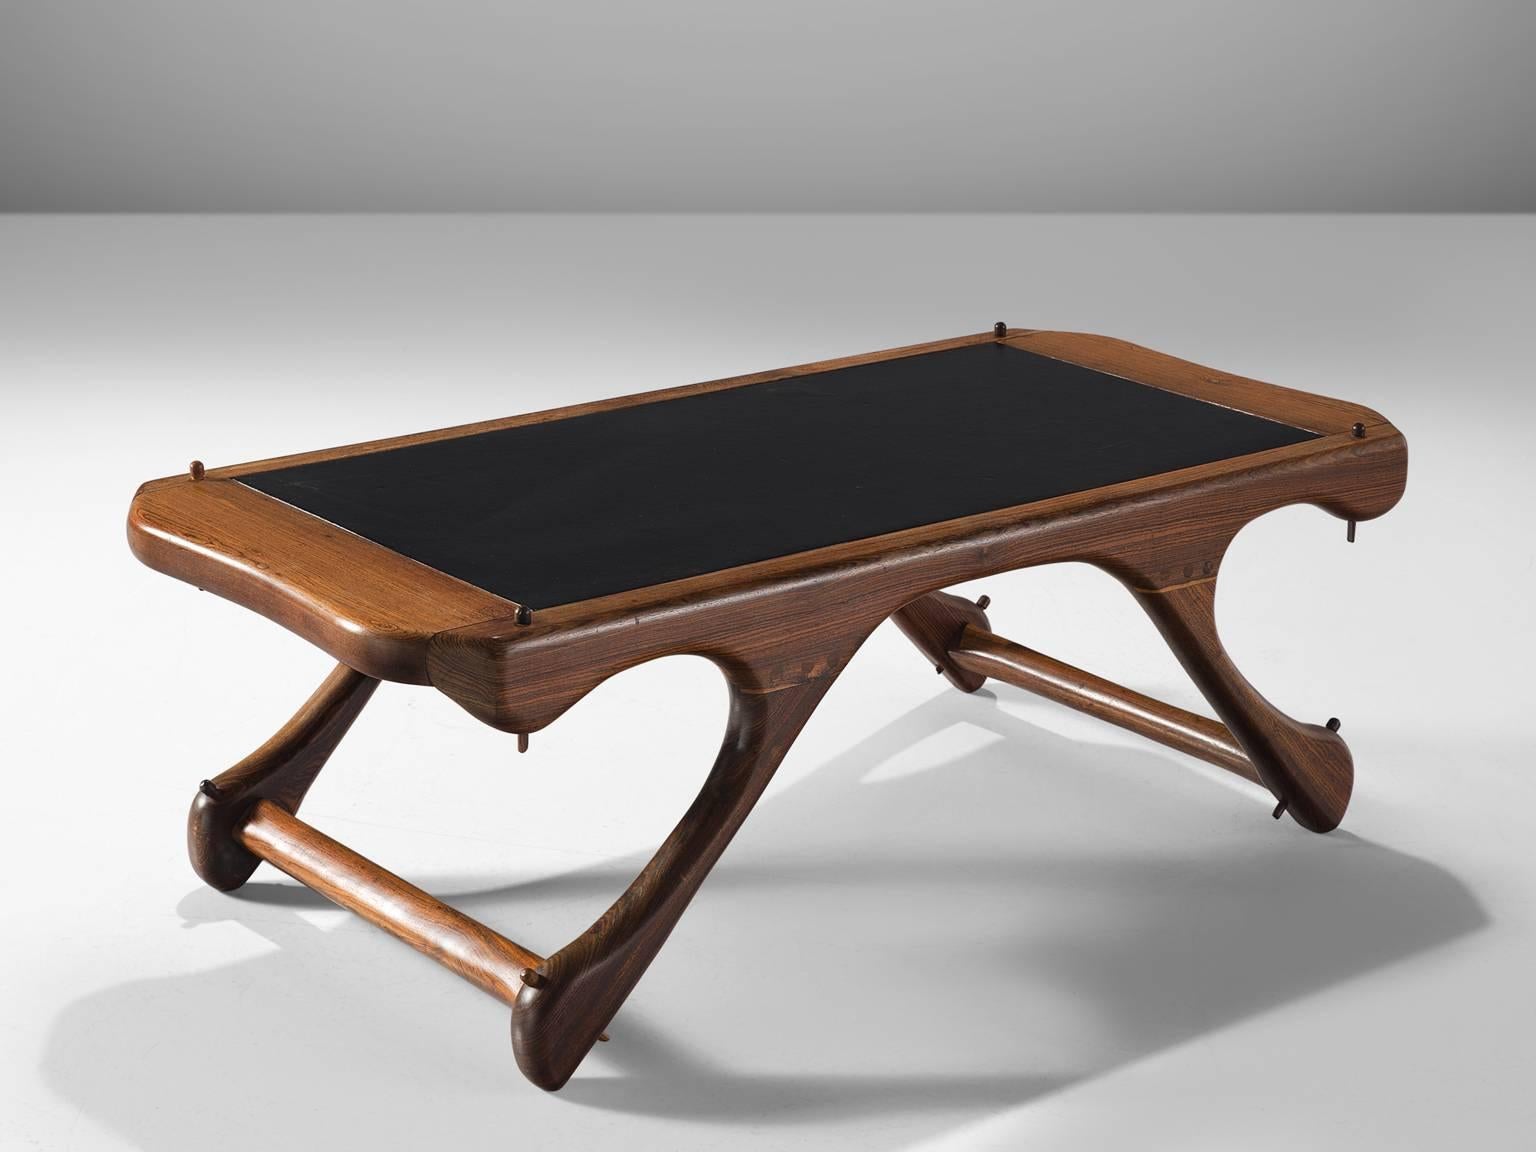 Don S. Shoemaker for Señal Furniture, coffee table, in cocobolo and black leather, Mexico, 1960s. 

This sculptural coffee table in Cocobolo rosewood and leather are made in Mexico. The table is accompanied by a set of chairs that is also part of